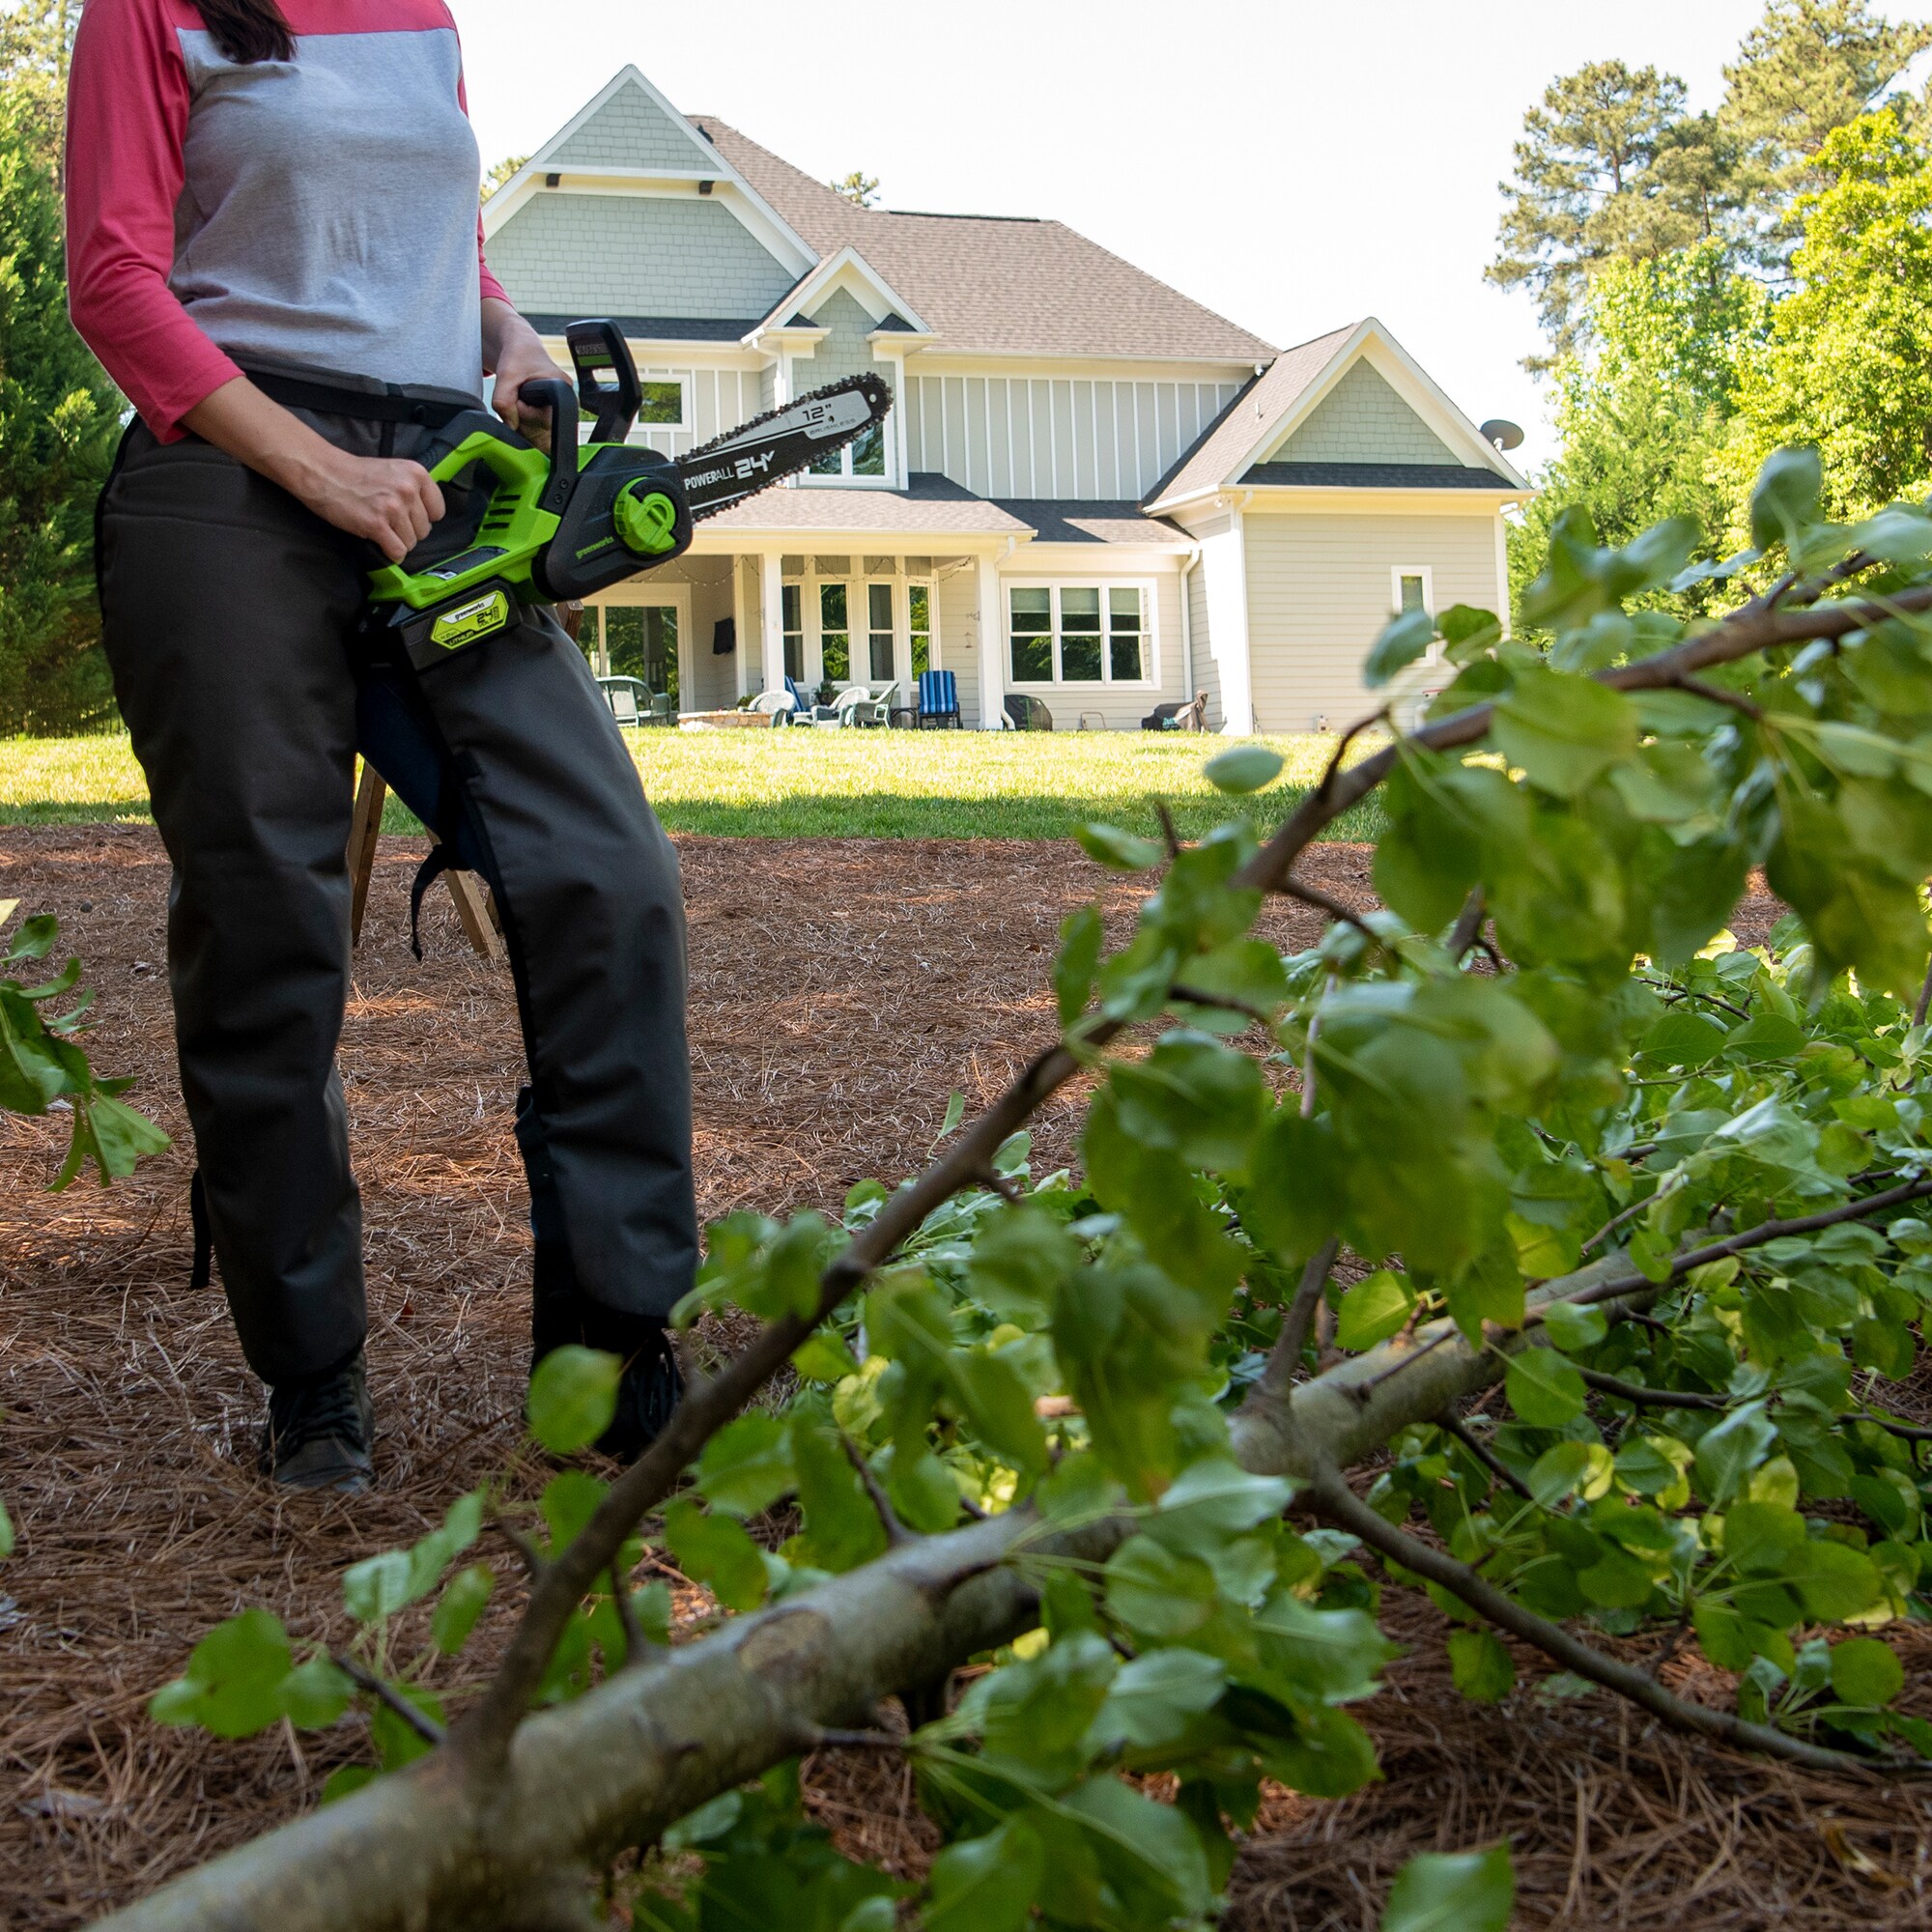 Greenworks 24-Volt 12-in Brushless Cordless Electric Chainsaw 4 Ah (Battery & Charger Included)